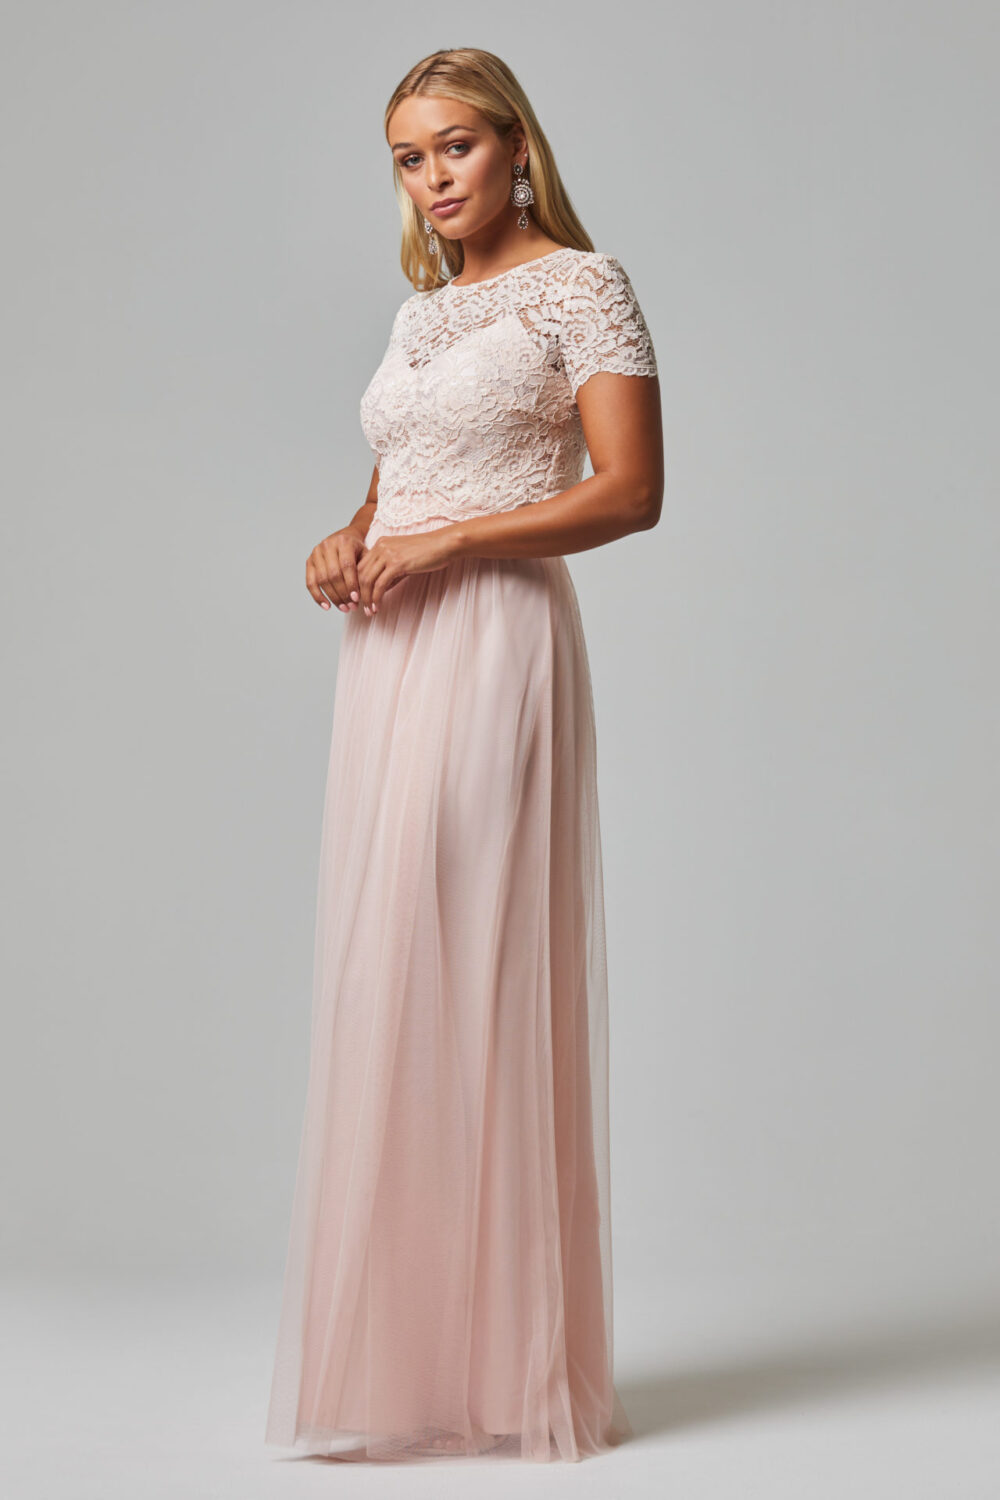 OAKLYN TO823 2019 Autumn Winter Bridesmaid dress by Tania Olsen Designs